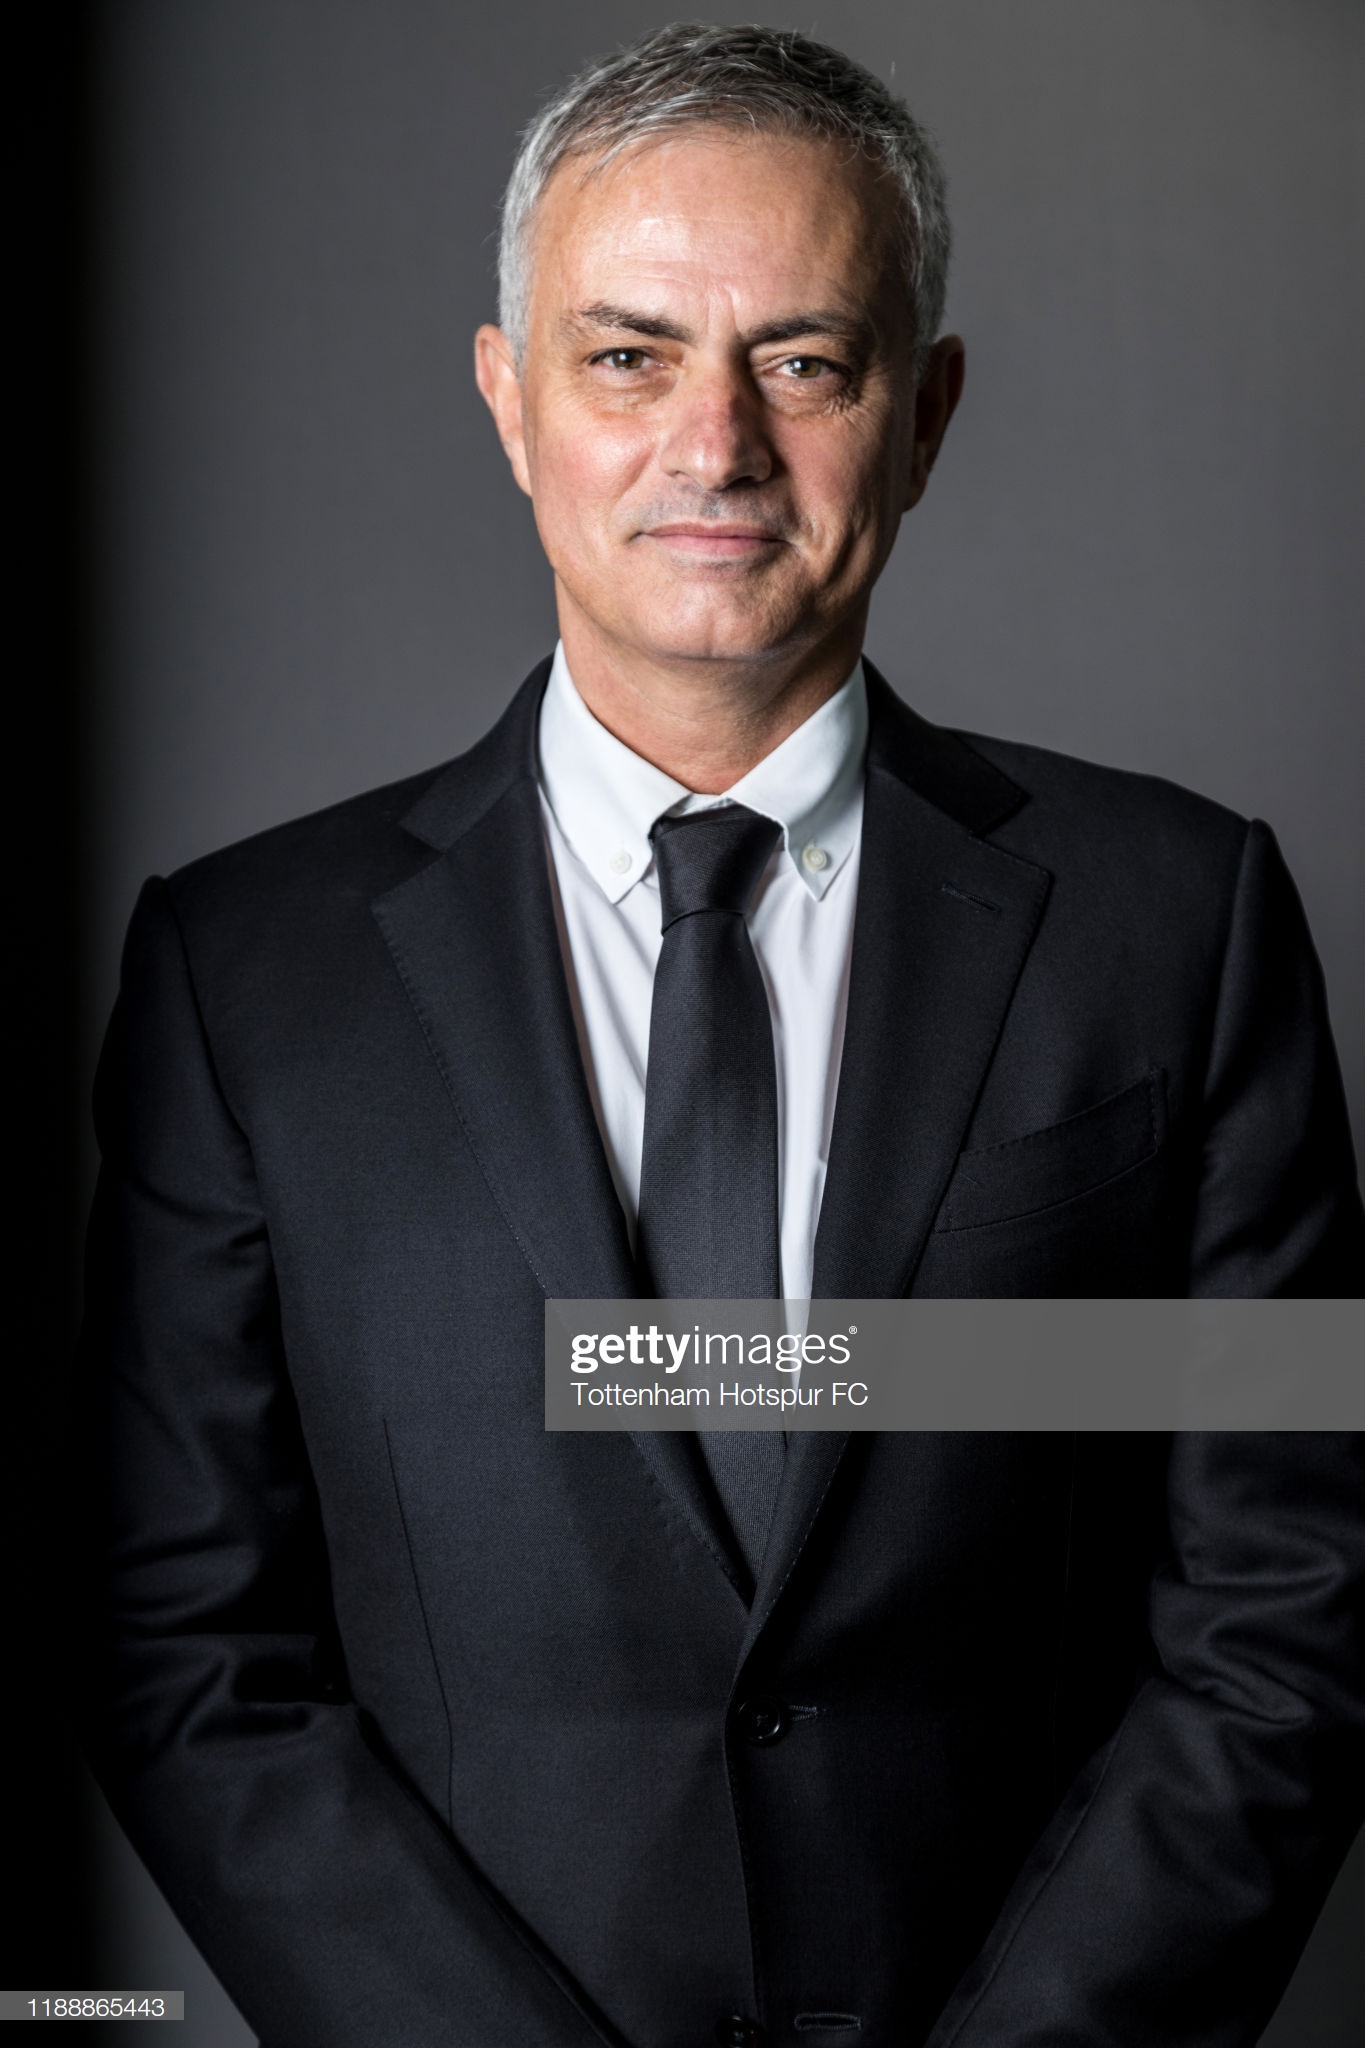 gettyimages-1188865443-2048x2048.jpg